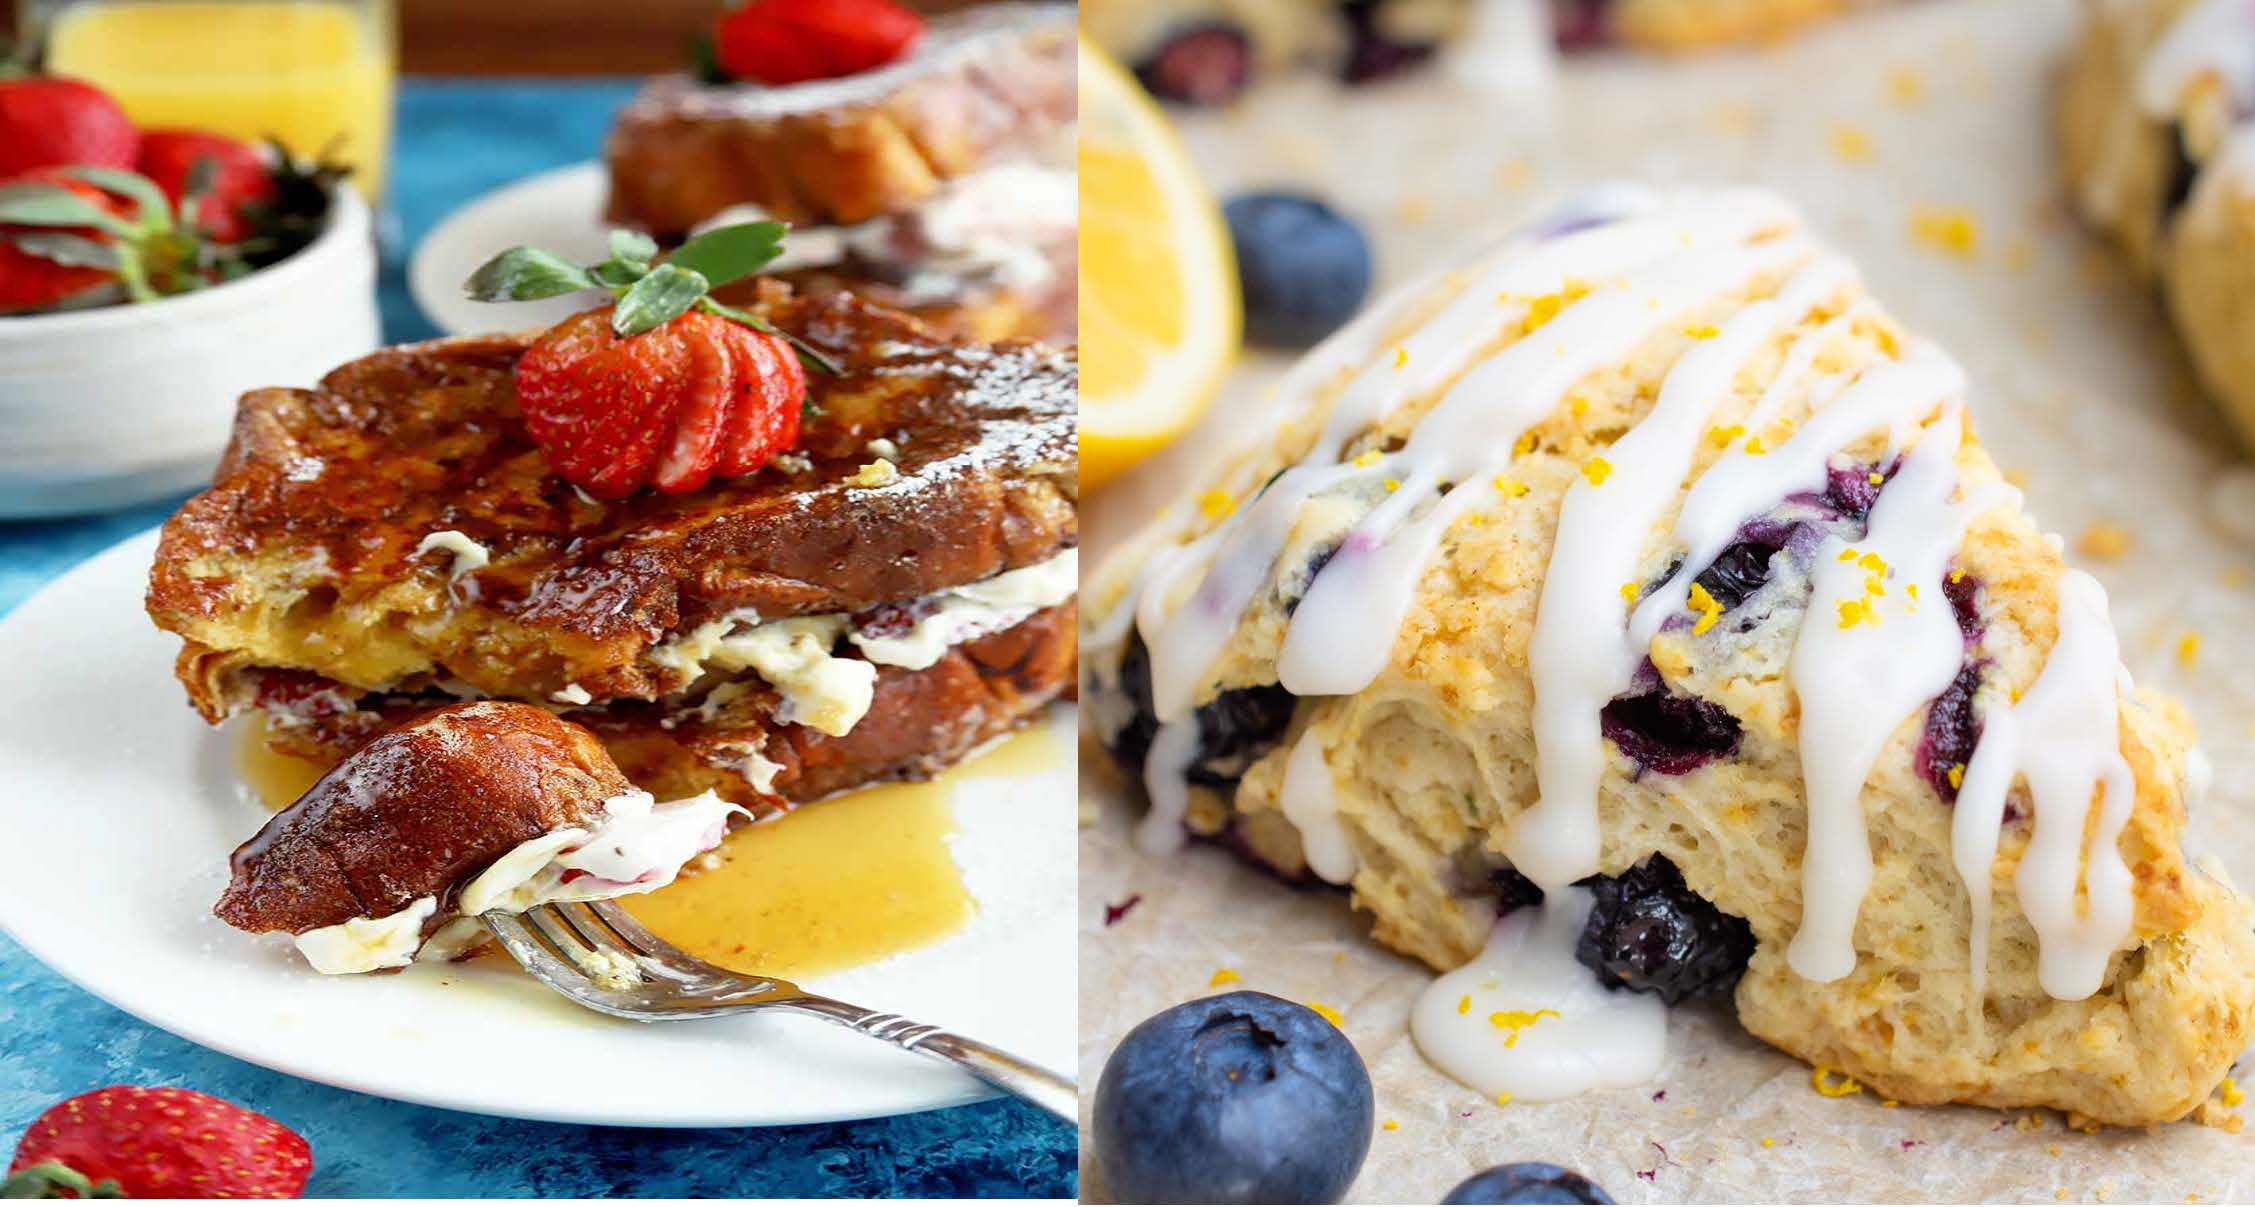 Collage of 2 plates of food. One featuring Stuffed French Toast and the other a Blueberry scone.